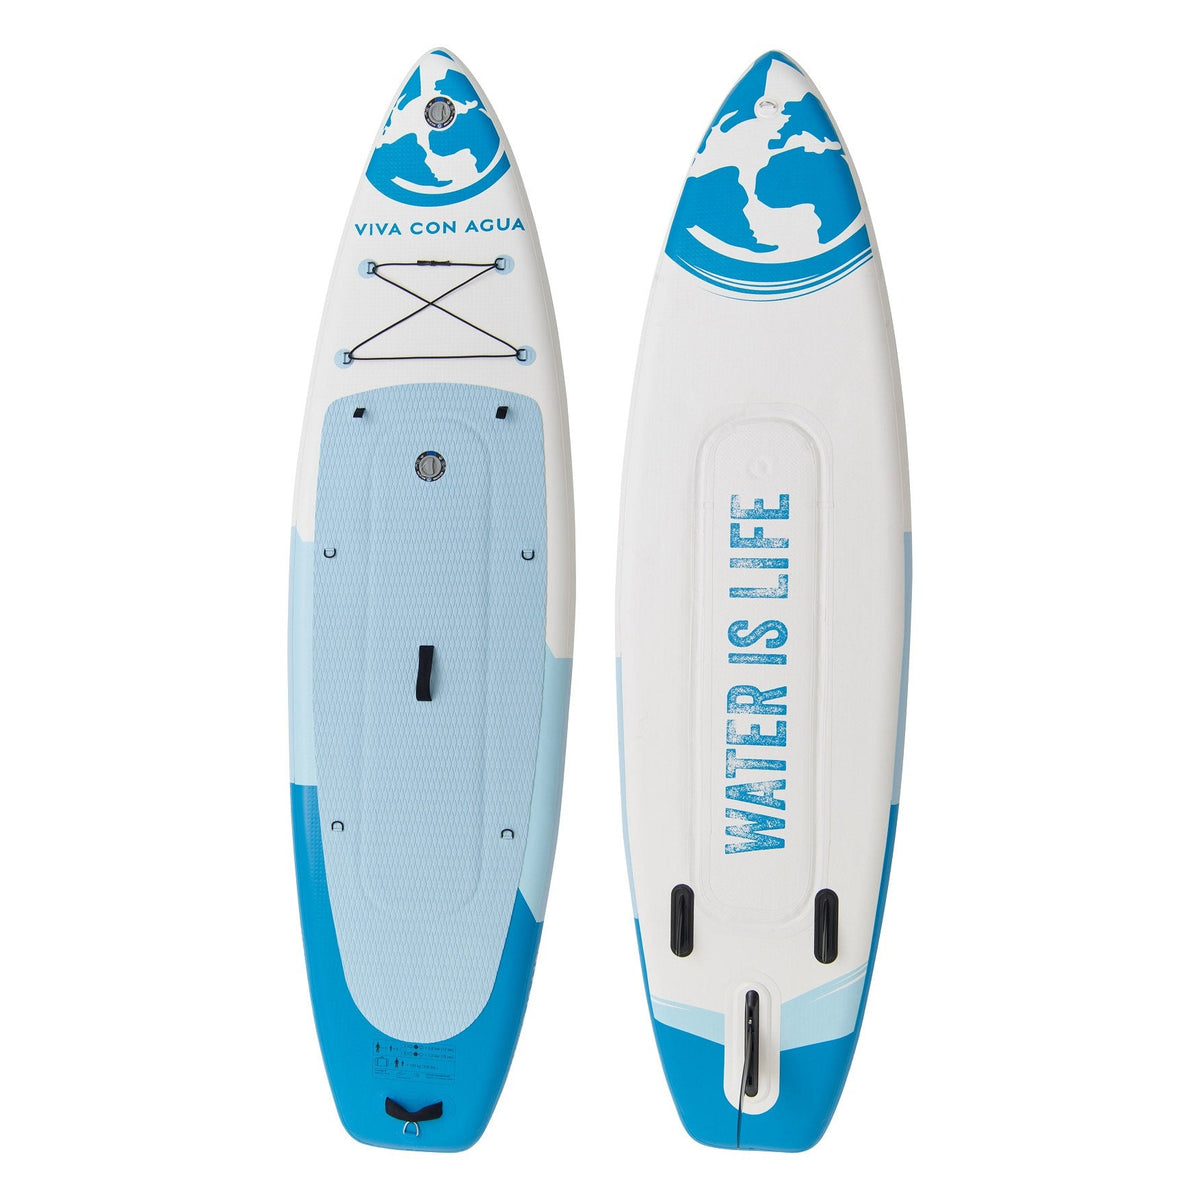 Viva con Agua - Stand Up Paddle Board inkl. Zubehör - Poolpirat